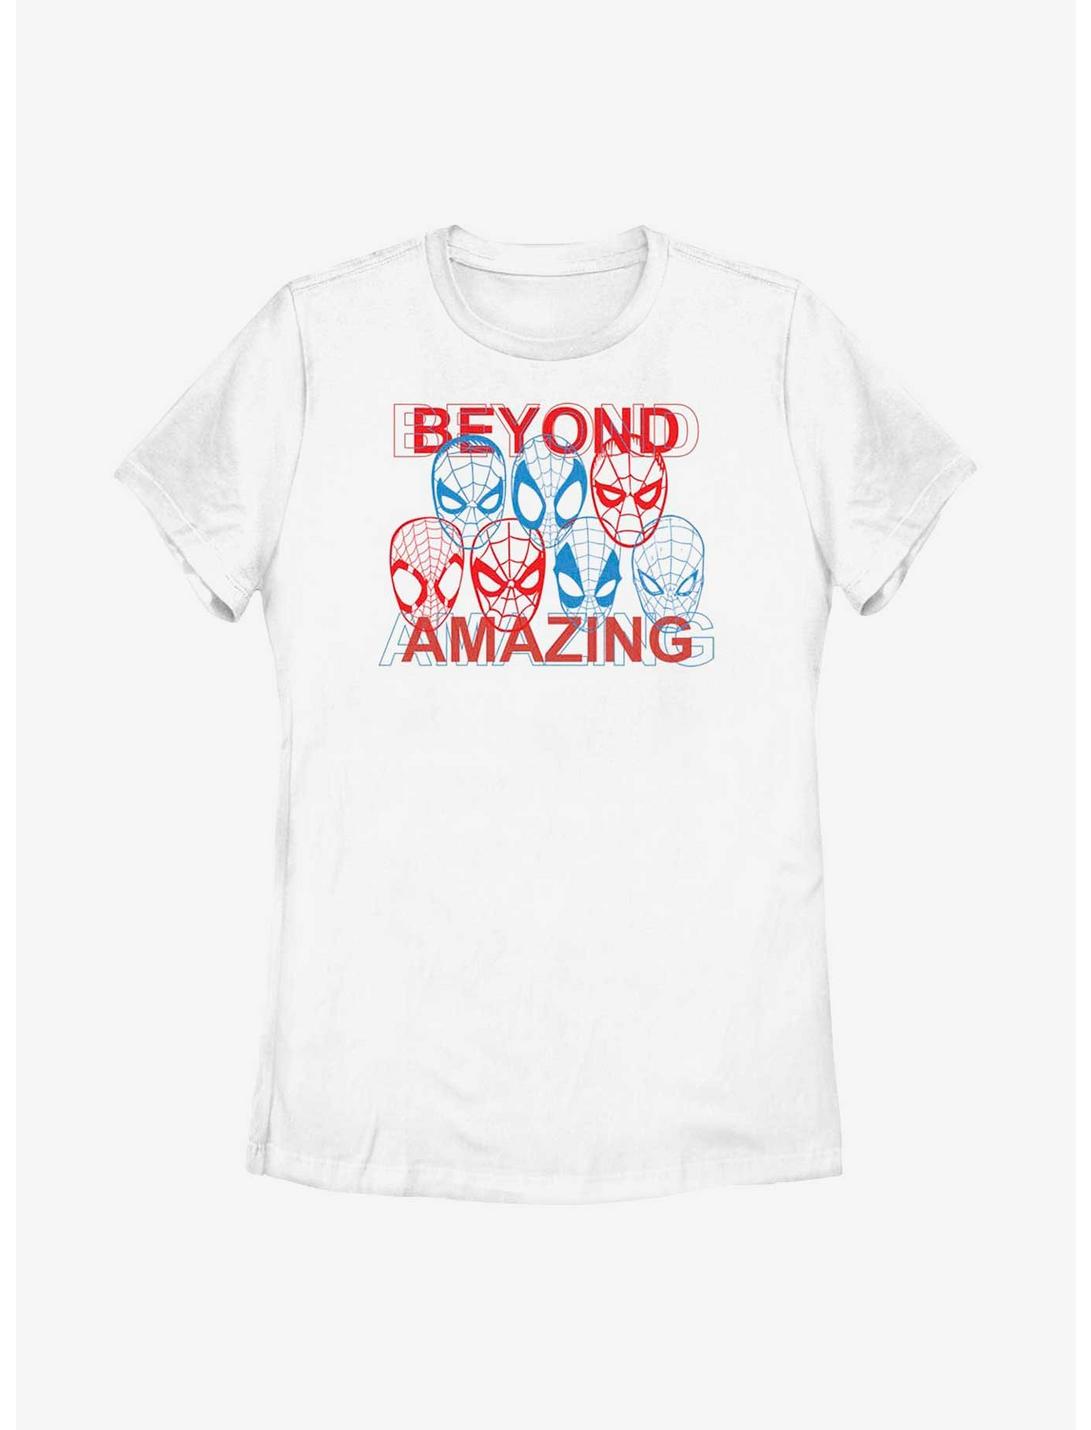 Marvel Spider-Man Beyond Amazing Faces Womens T-Shirt, WHITE, hi-res